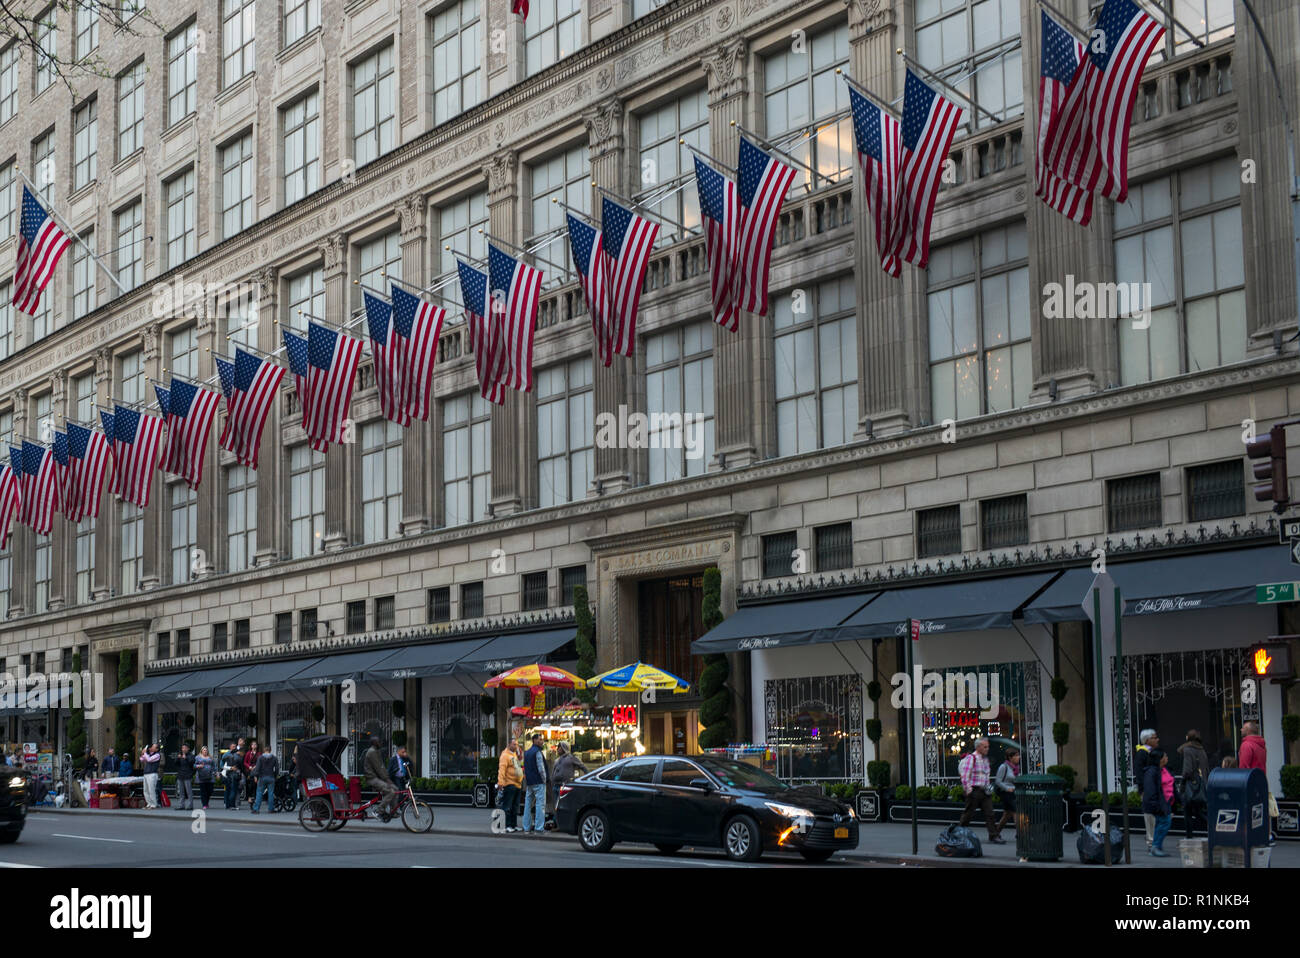 Exterior view of Saks Fifth Avenue, Fifth Avenue, Midtown Manhattan, New York City, New York State, USA Stock Photo